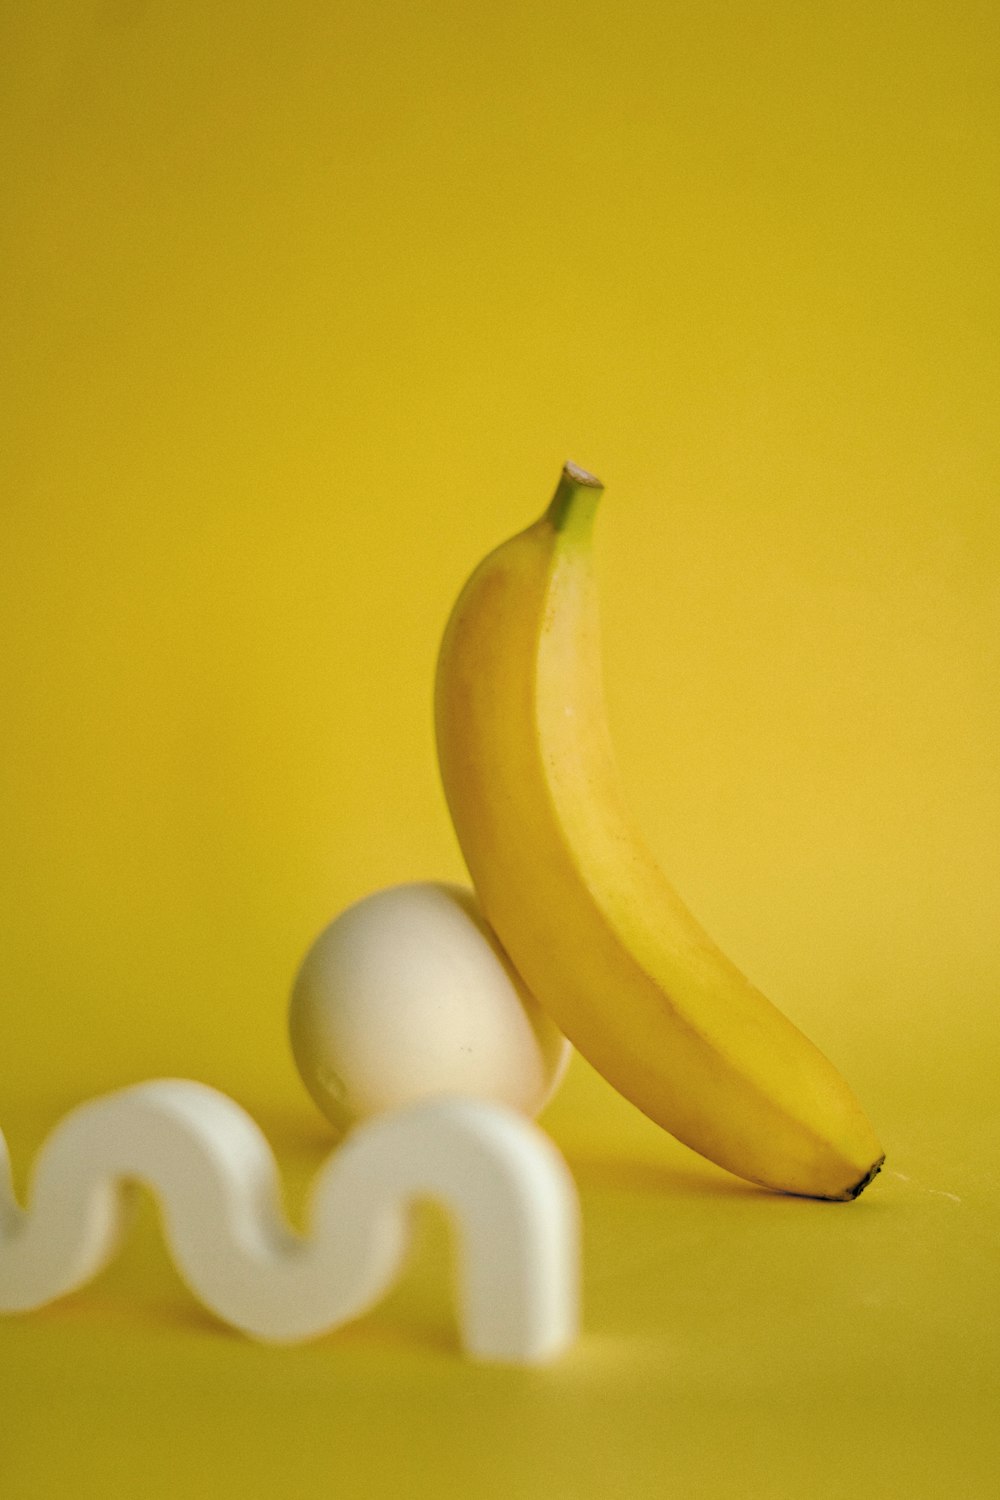 a banana sitting next to an egg on a yellow background